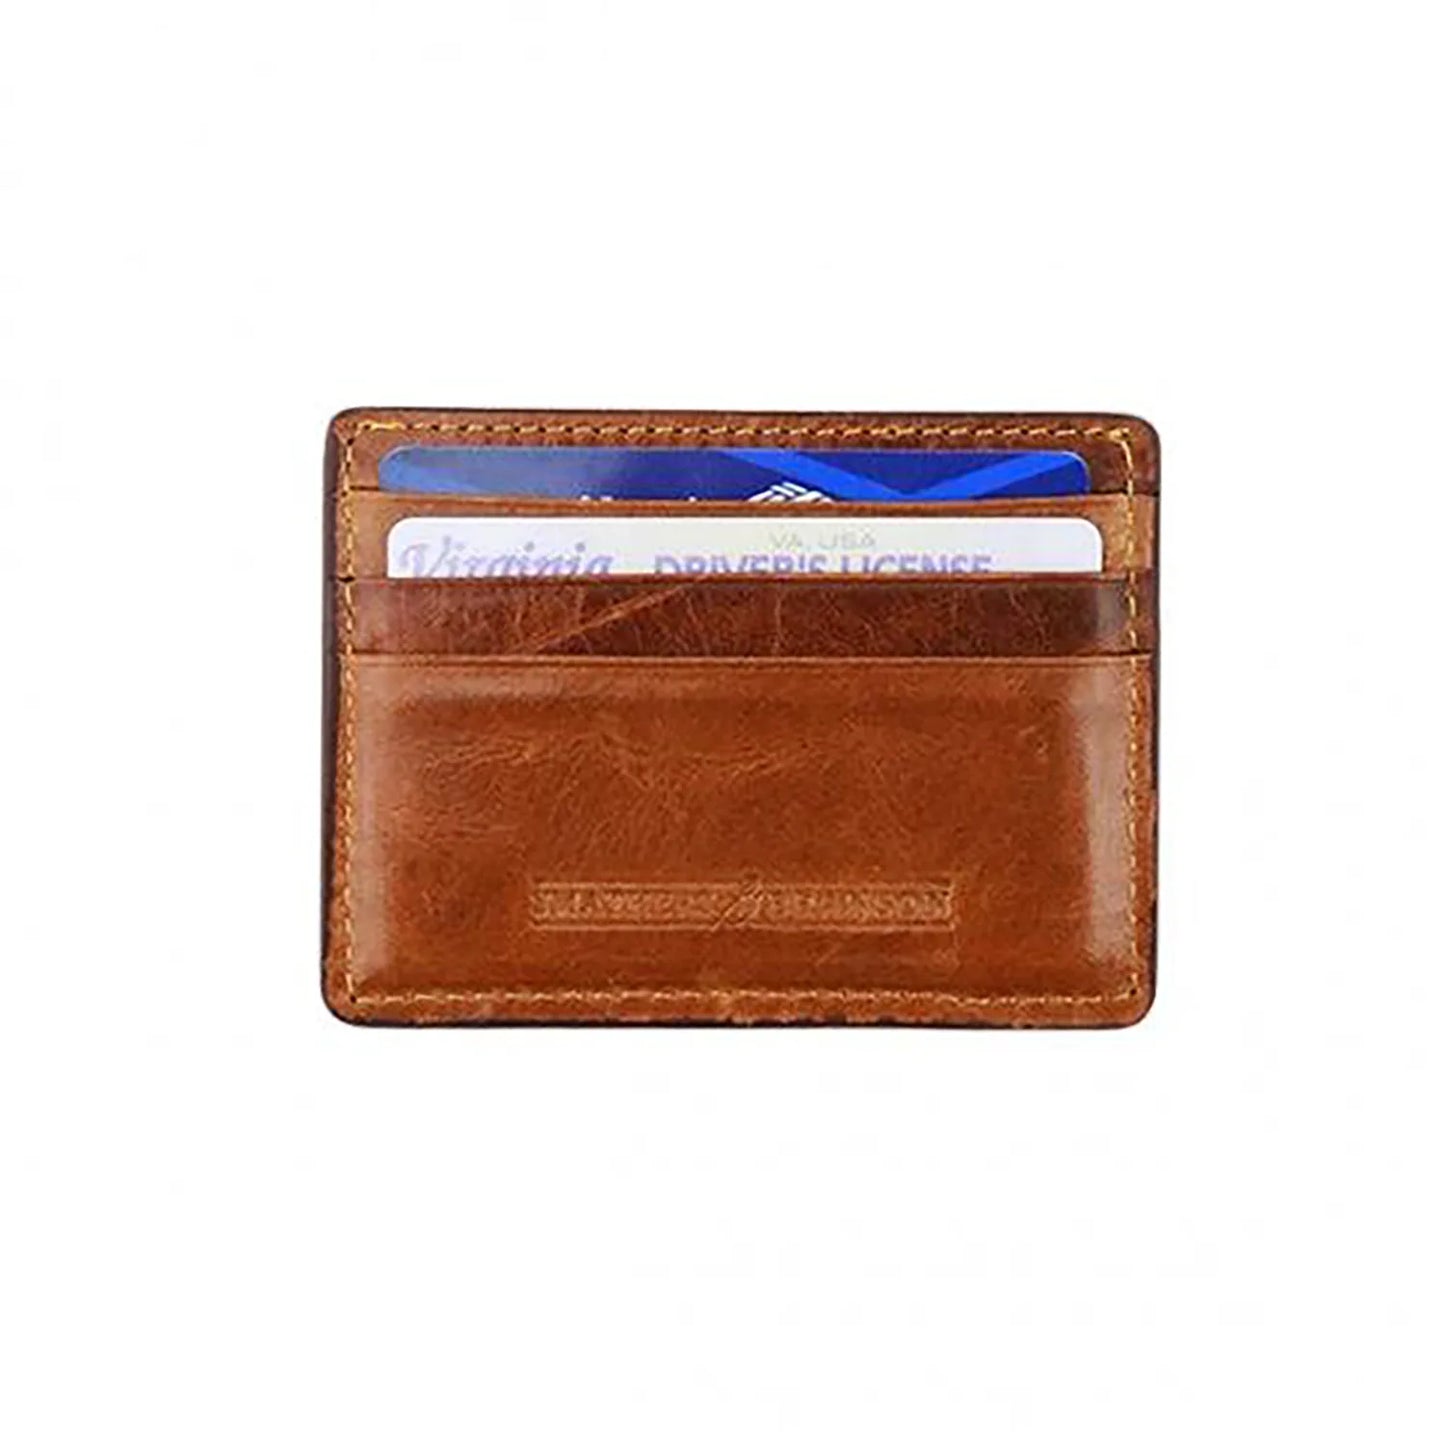 Smathers & Branson Card Wallet